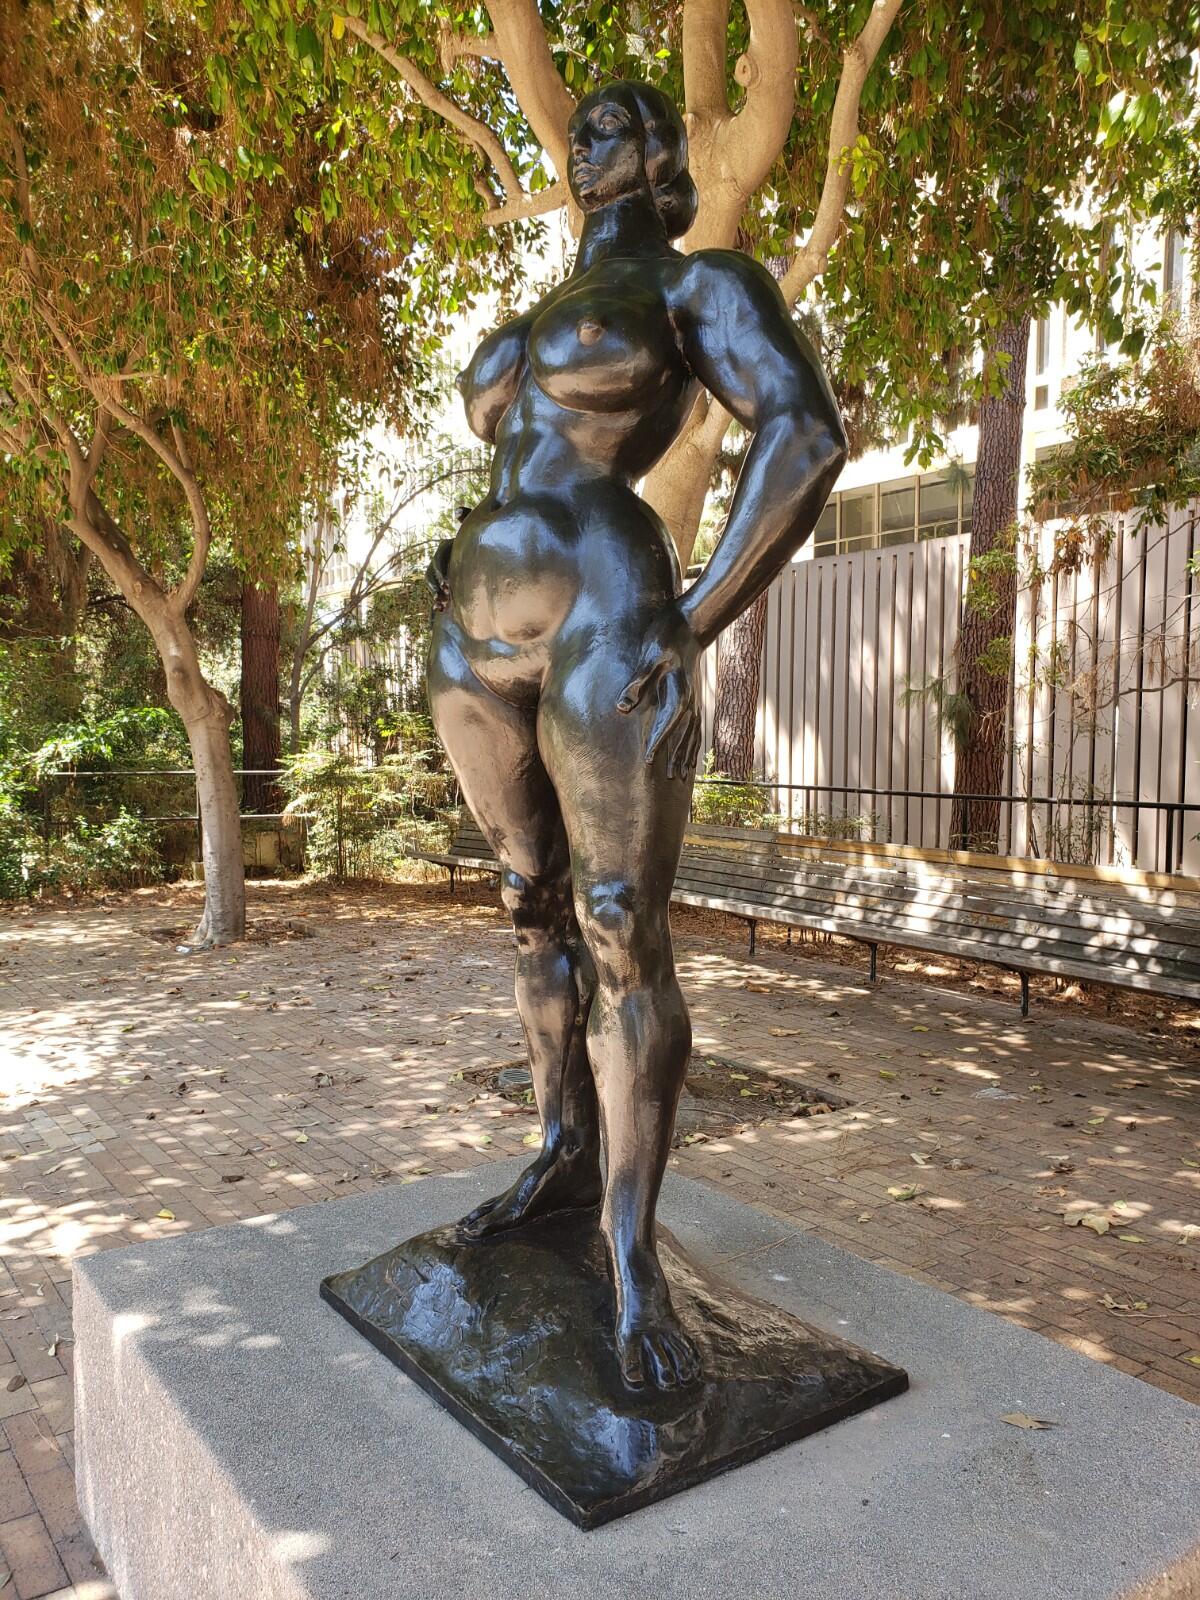 Gaston Lachaise's "Standing Woman," a 1932 work, is in the Franklin D. Murphy Sculpture Garden at UCLA.